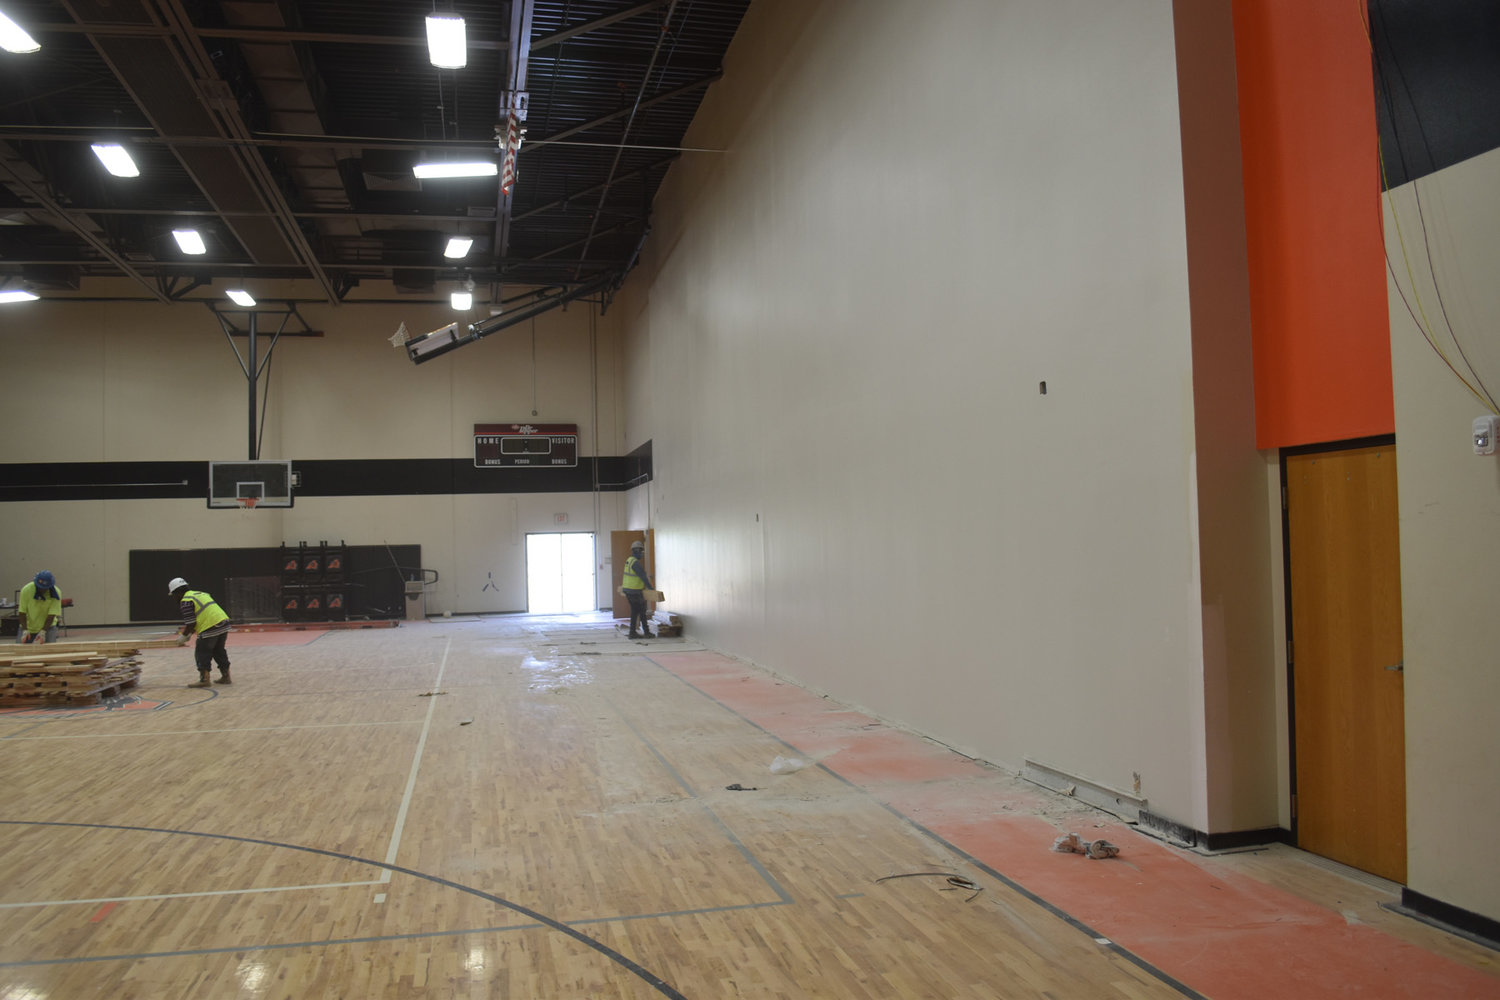 The gym floor at the MPC. The wall on the right is where the stage once was.